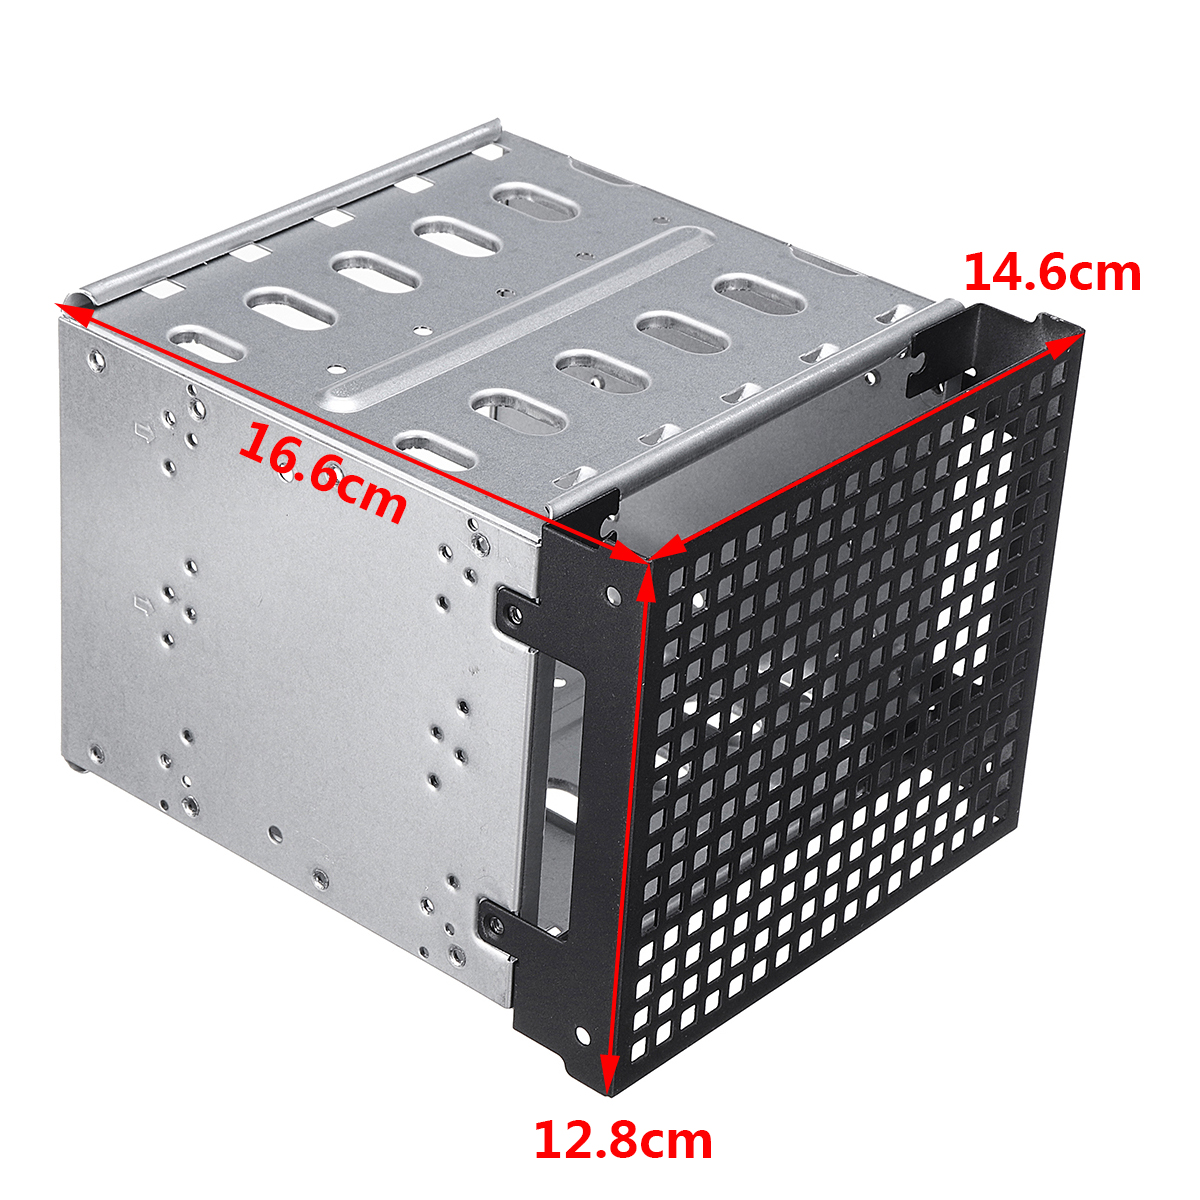 5.25" to 5x 3.5" SATA SAS HDD Cage Rack Hard Drive Tray Caddy Converter with Fan Space 16